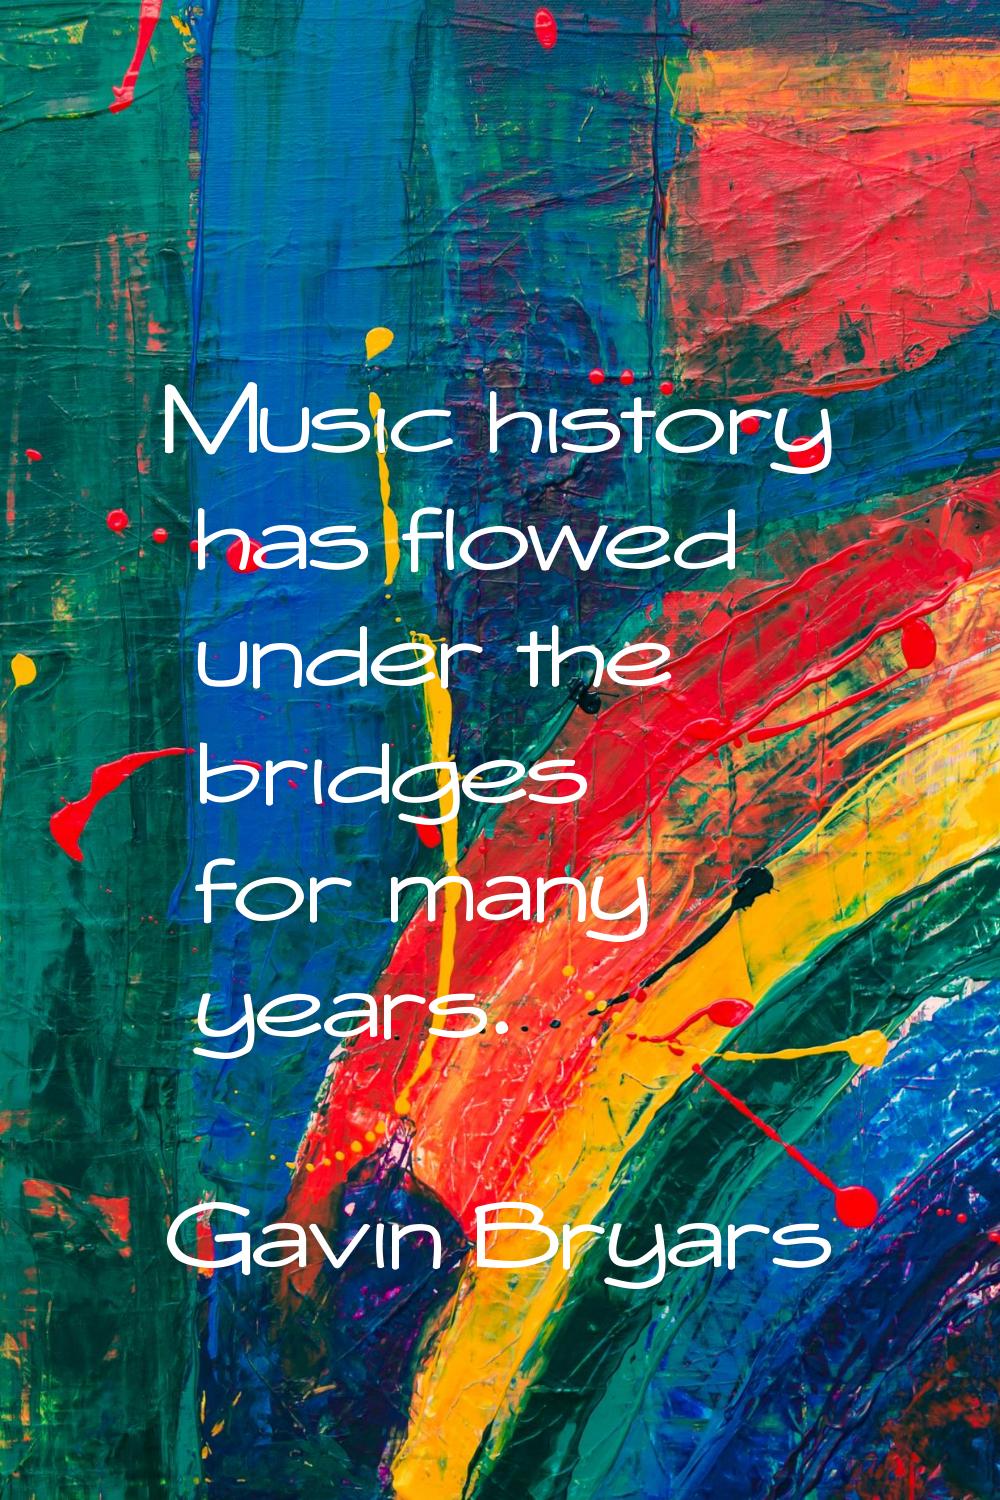 Music history has flowed under the bridges for many years.